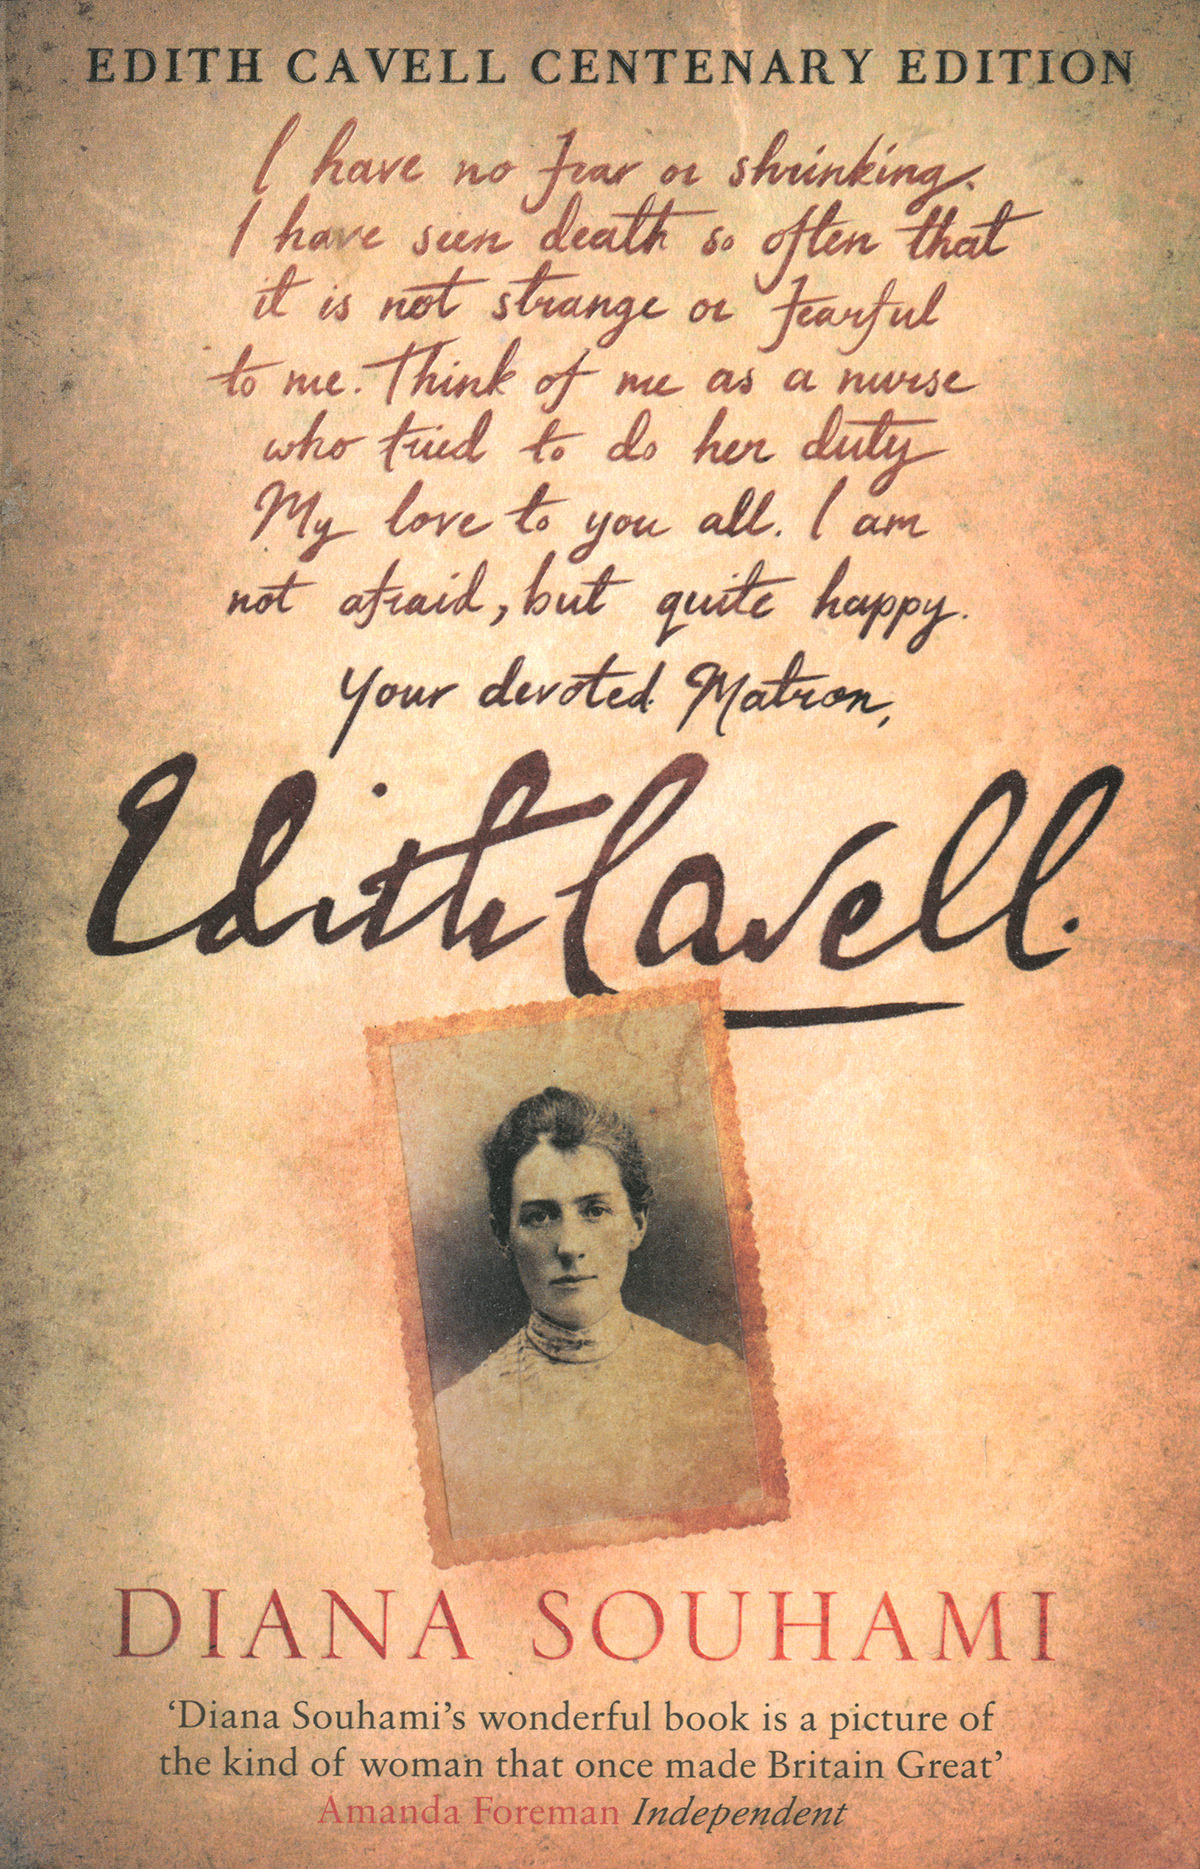 ‘Edith Cavell’ by Diana Souhami